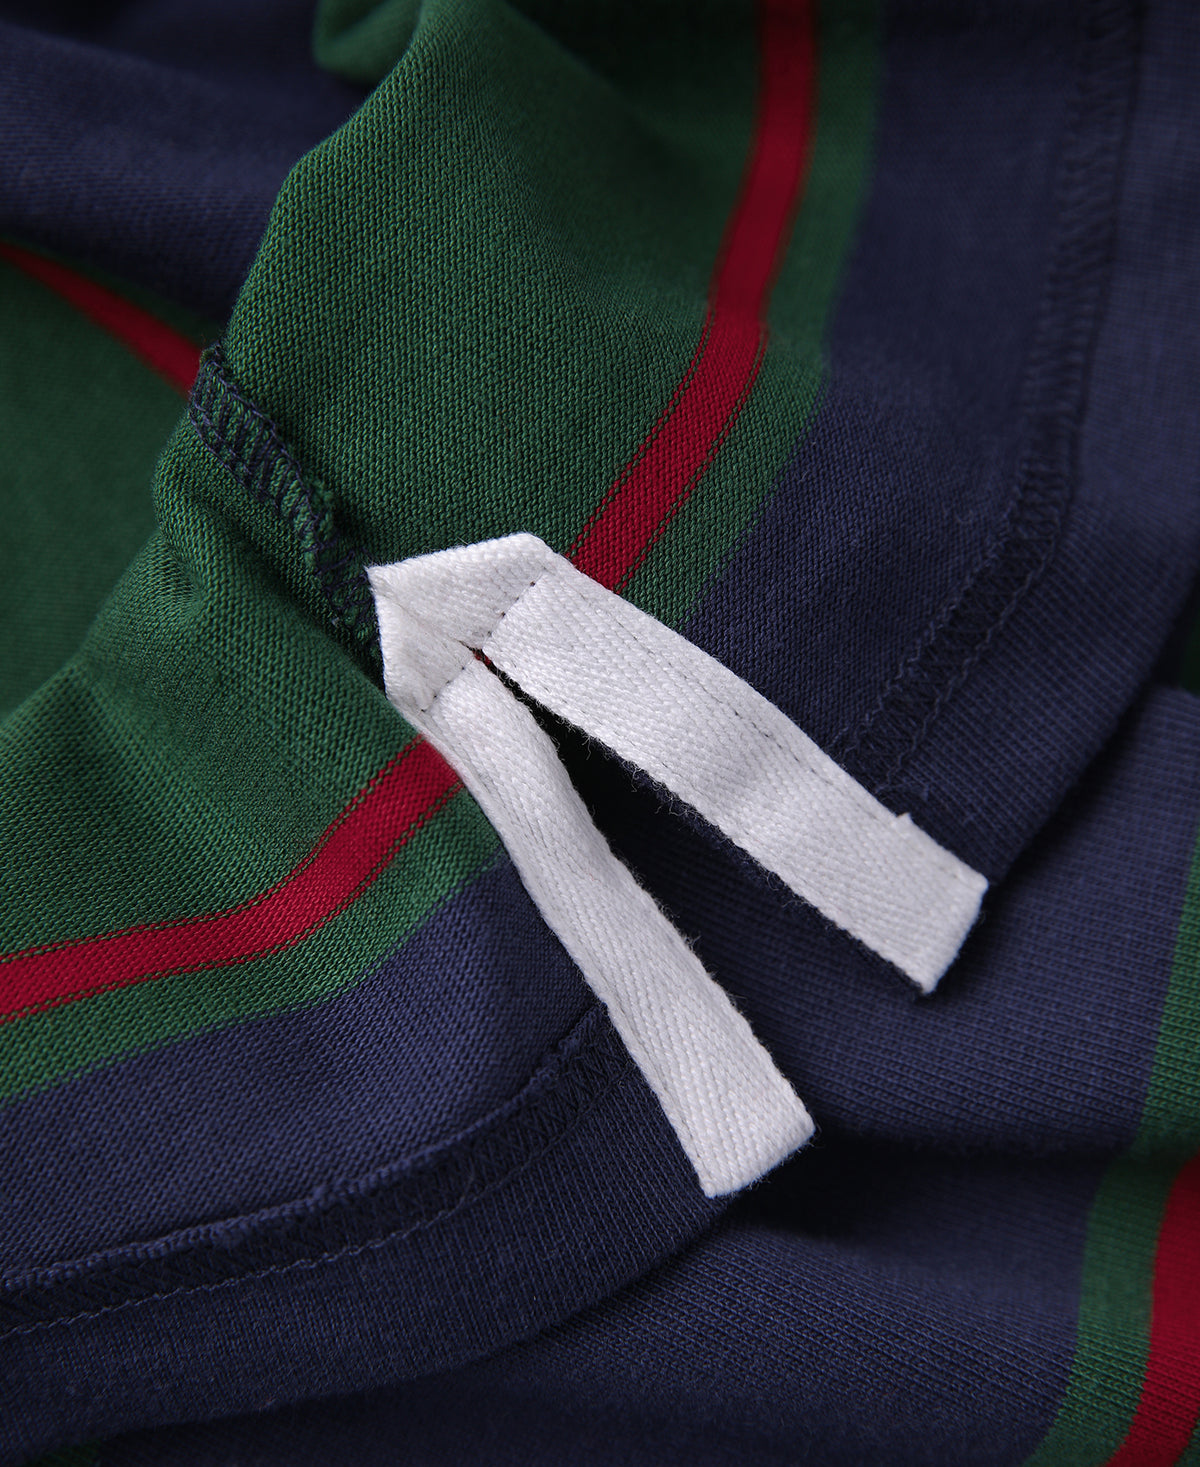 Classic Fit Striped Jersey Rugby Shirt - Green/Navy/Red